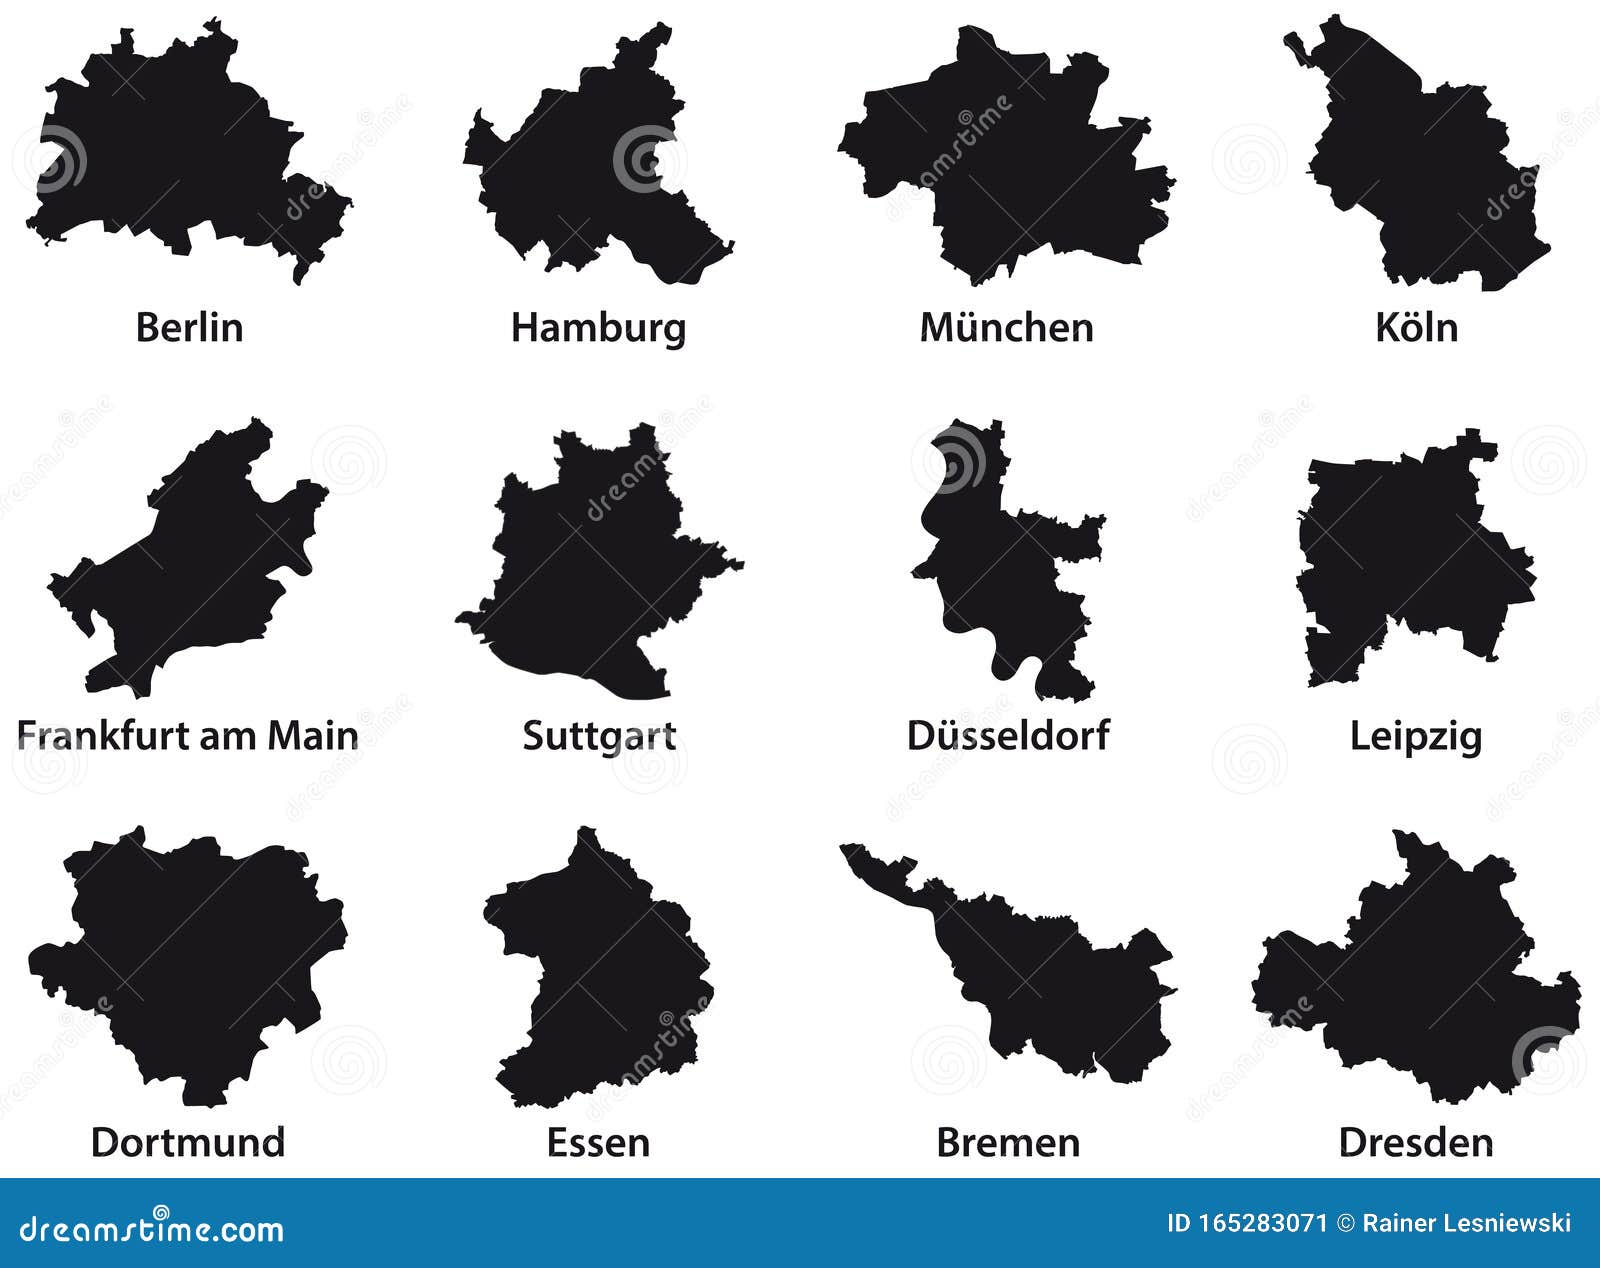 black outline maps of the 12 most populous cities of the federal republic of germany